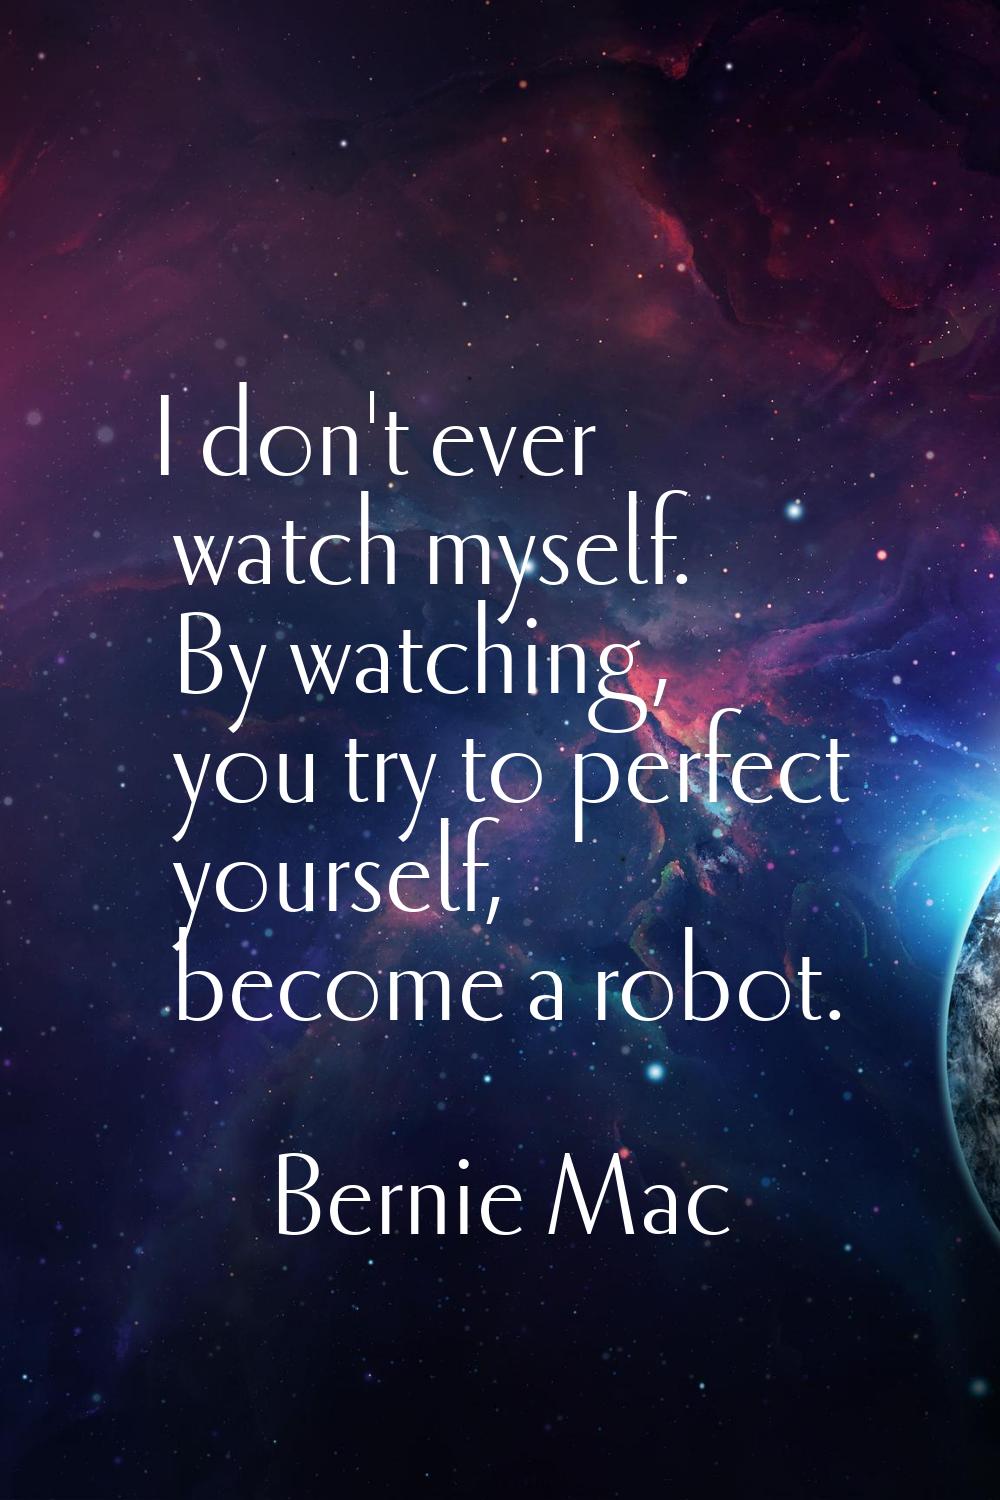 I don't ever watch myself. By watching, you try to perfect yourself, become a robot.